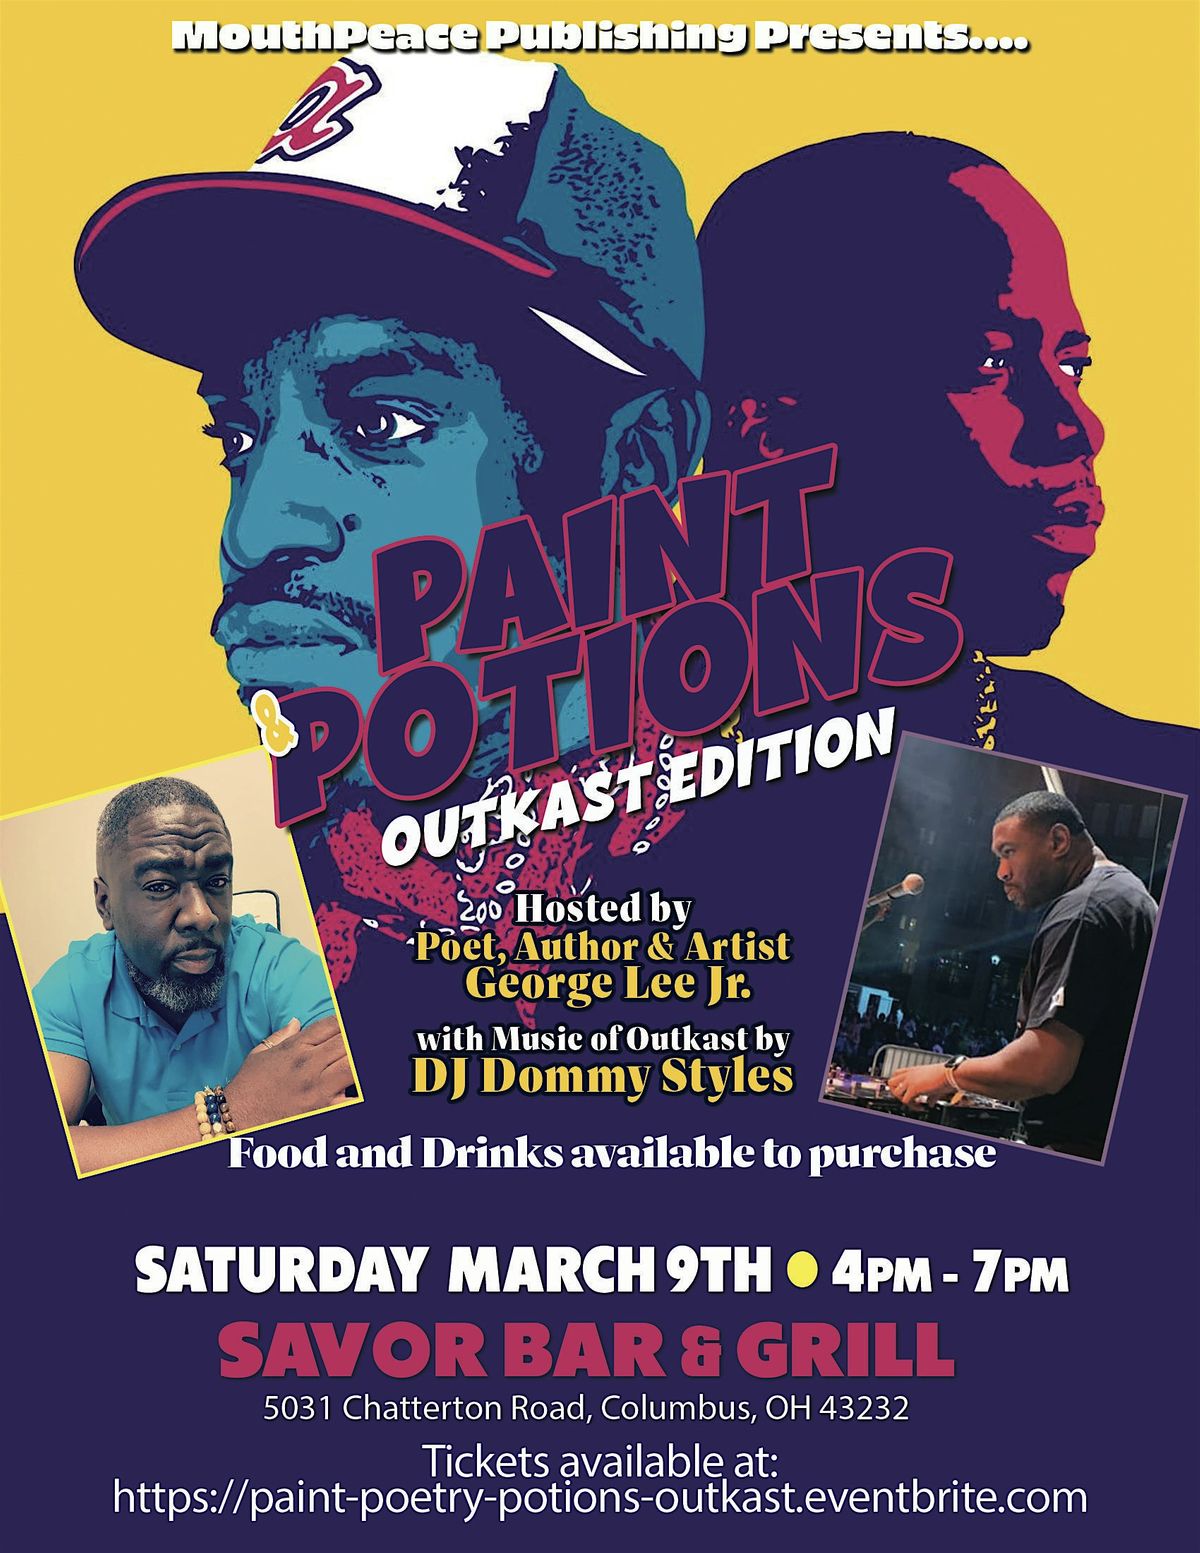 The Outkast Edition Of Paint, Poetry & Potions